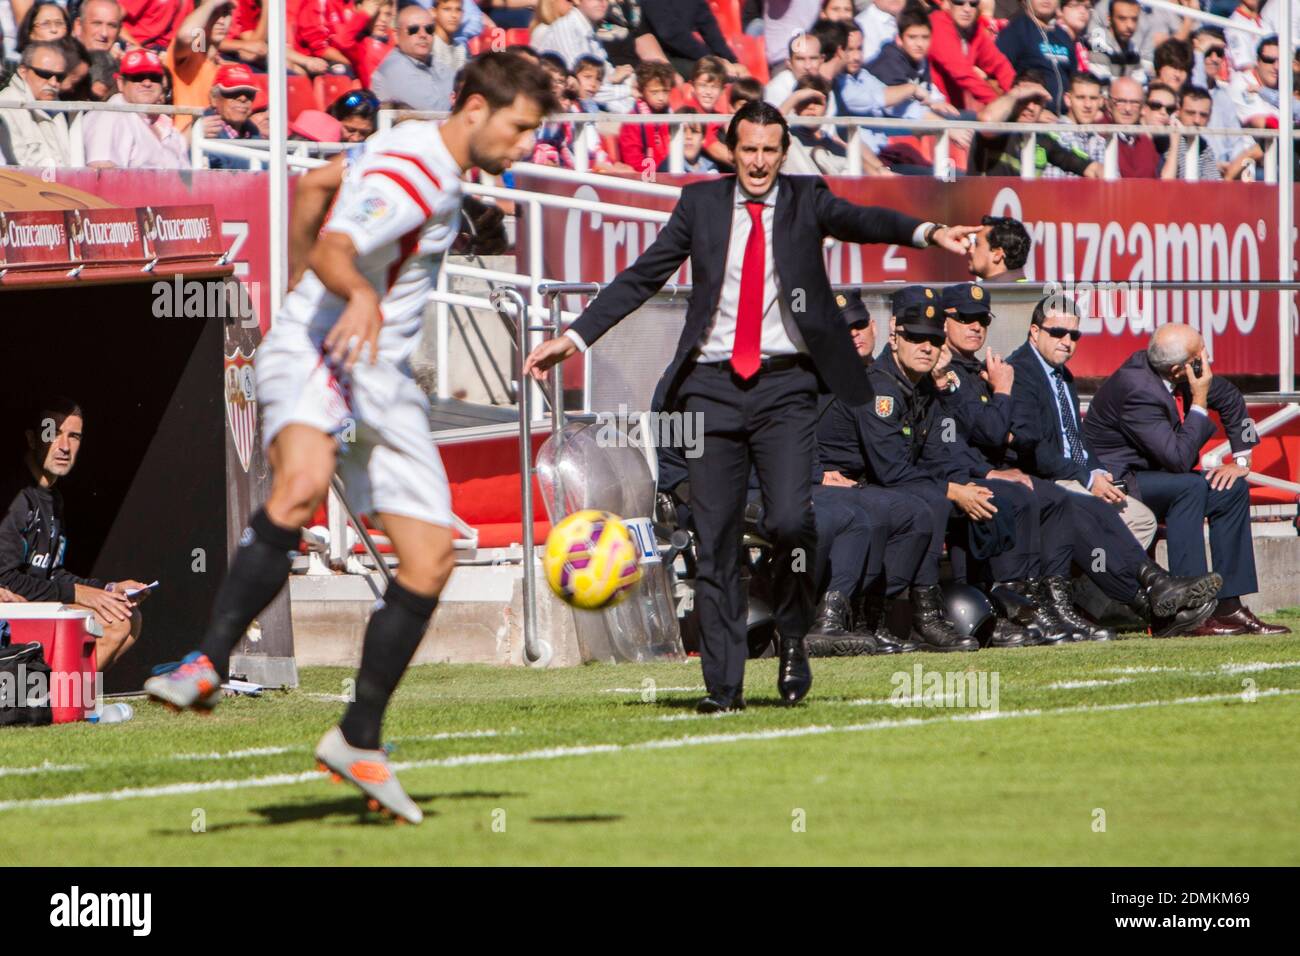 Unai Emery, coach of Sevilla FC, in acton during the match of La Liga BBVA between Sevilla FC and Levante UD at the Ramon Sanchez Pizjuan Stadium on November 9, 2014 in Seville, Spain Stock Photo